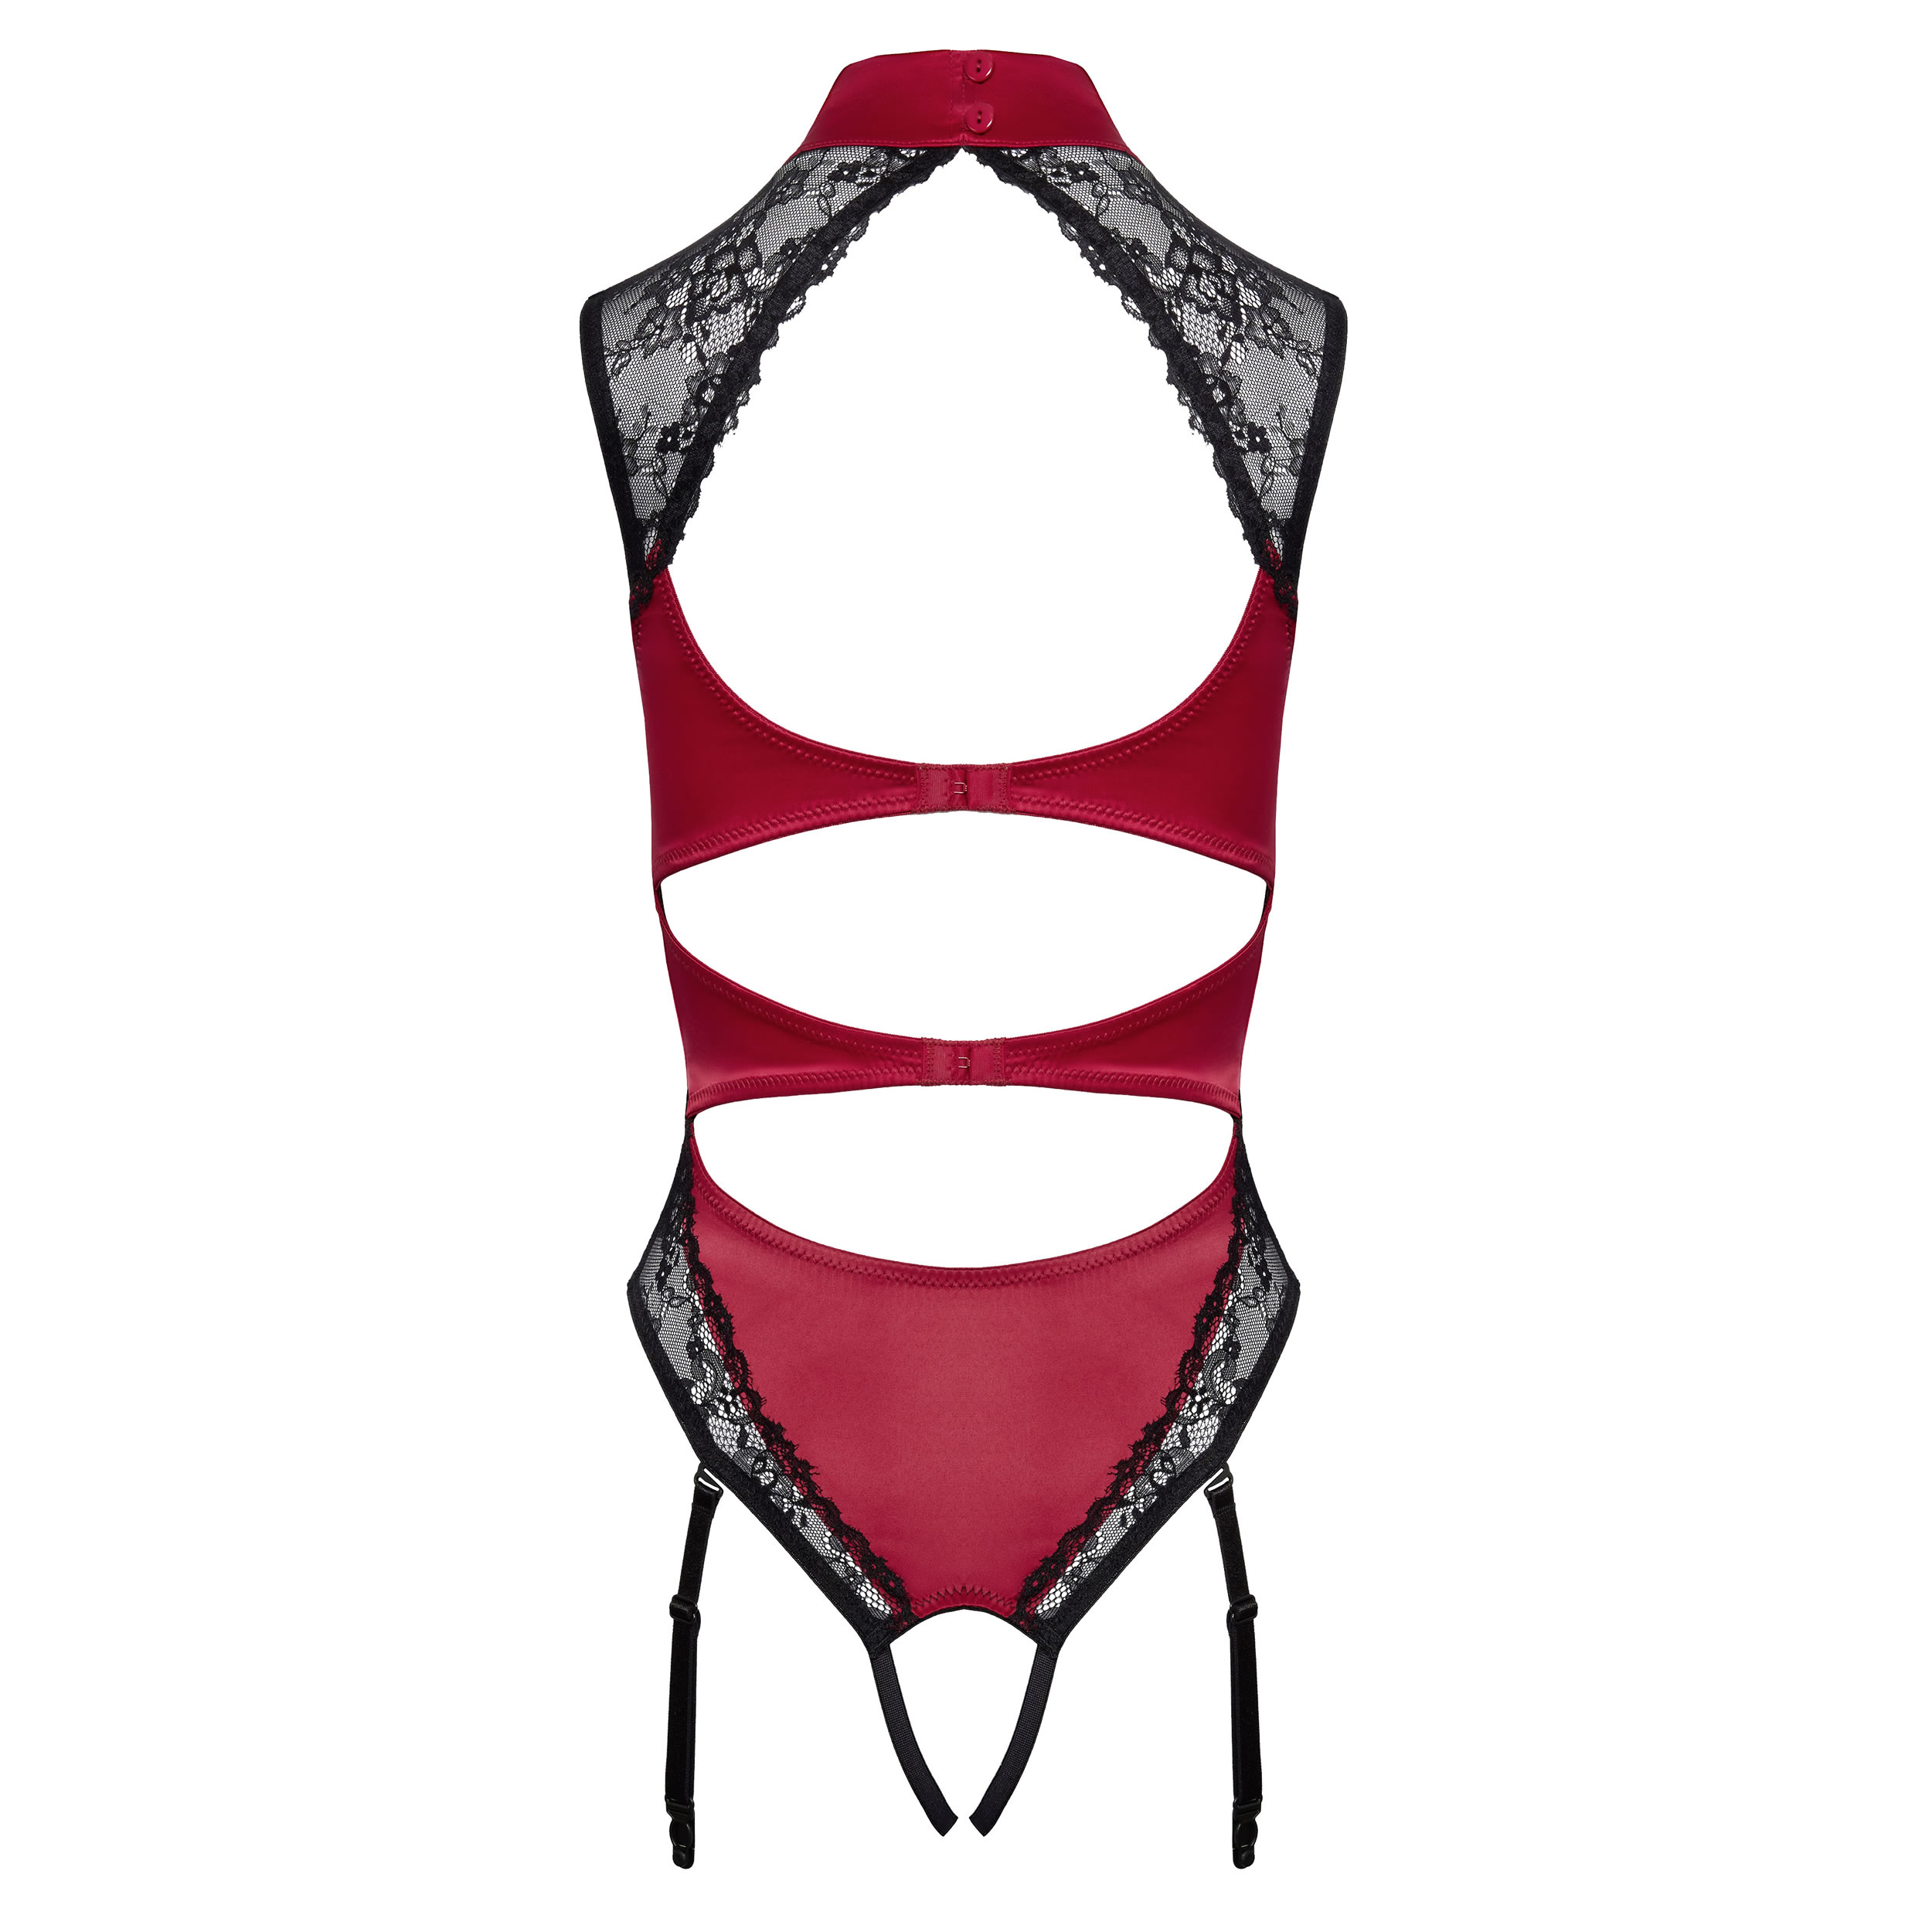 Crotchless Satin and Lace Bodysuit in Red and Black